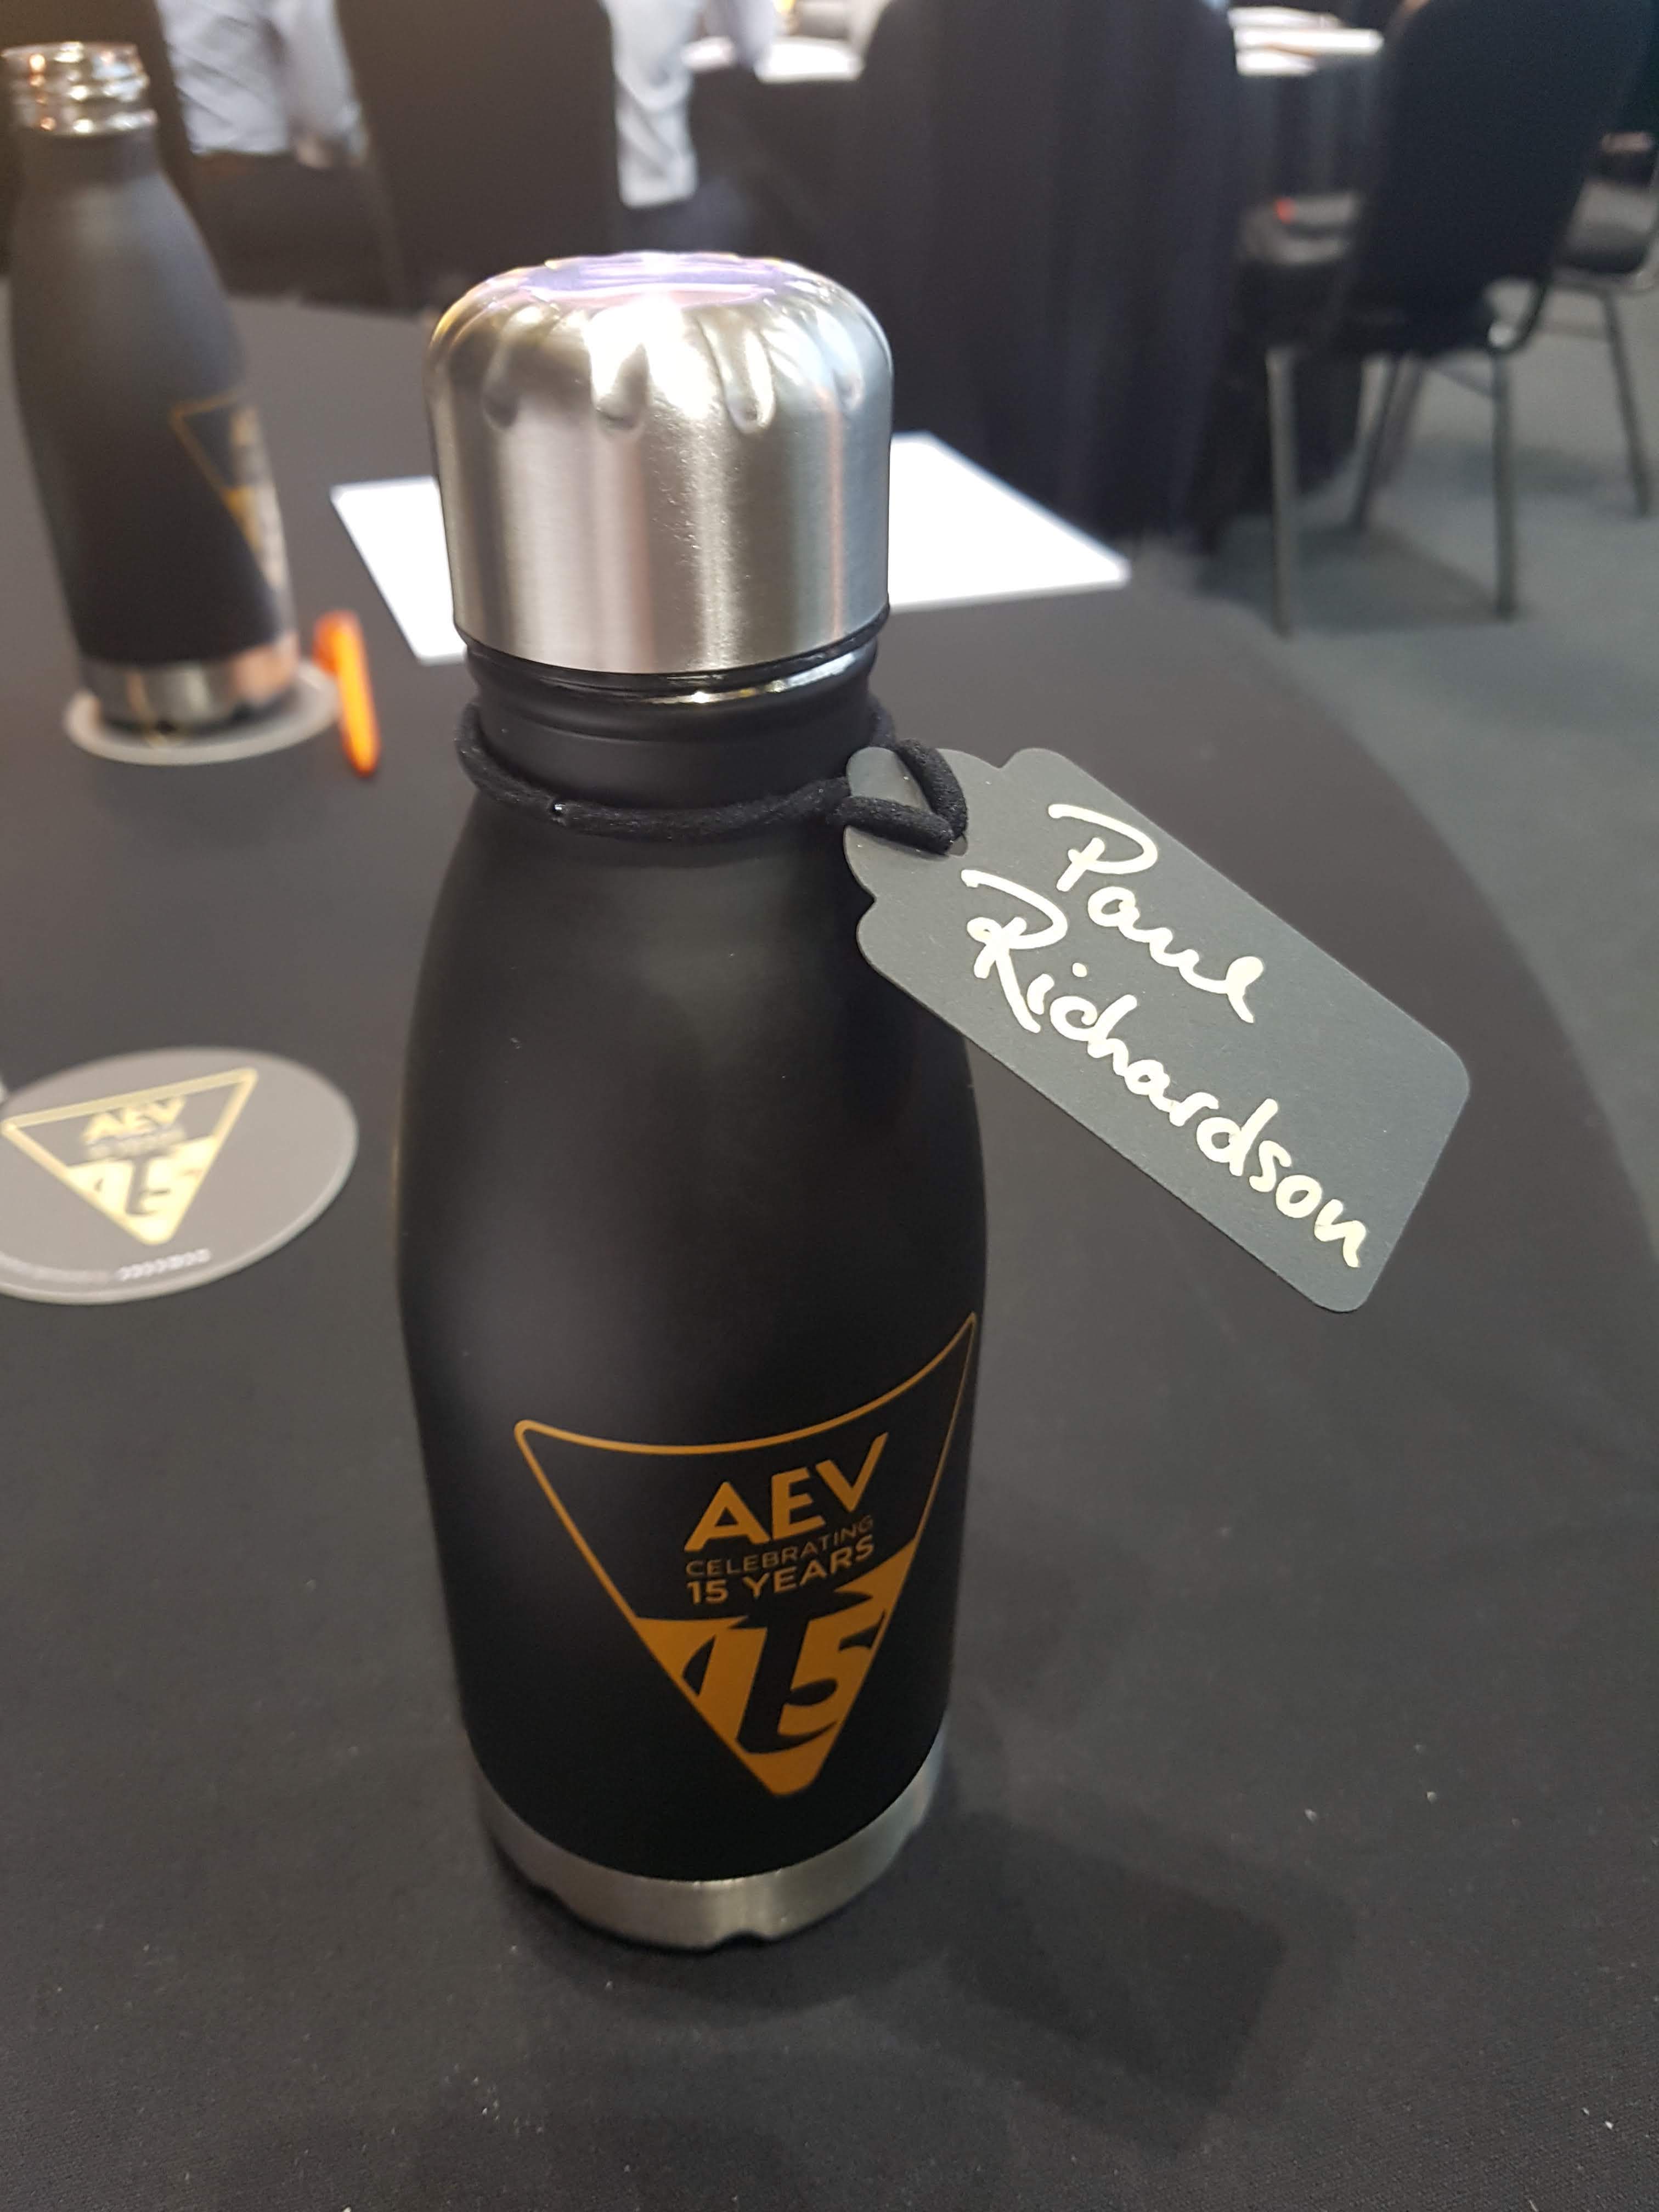 AEV Conference Personalised Goodies